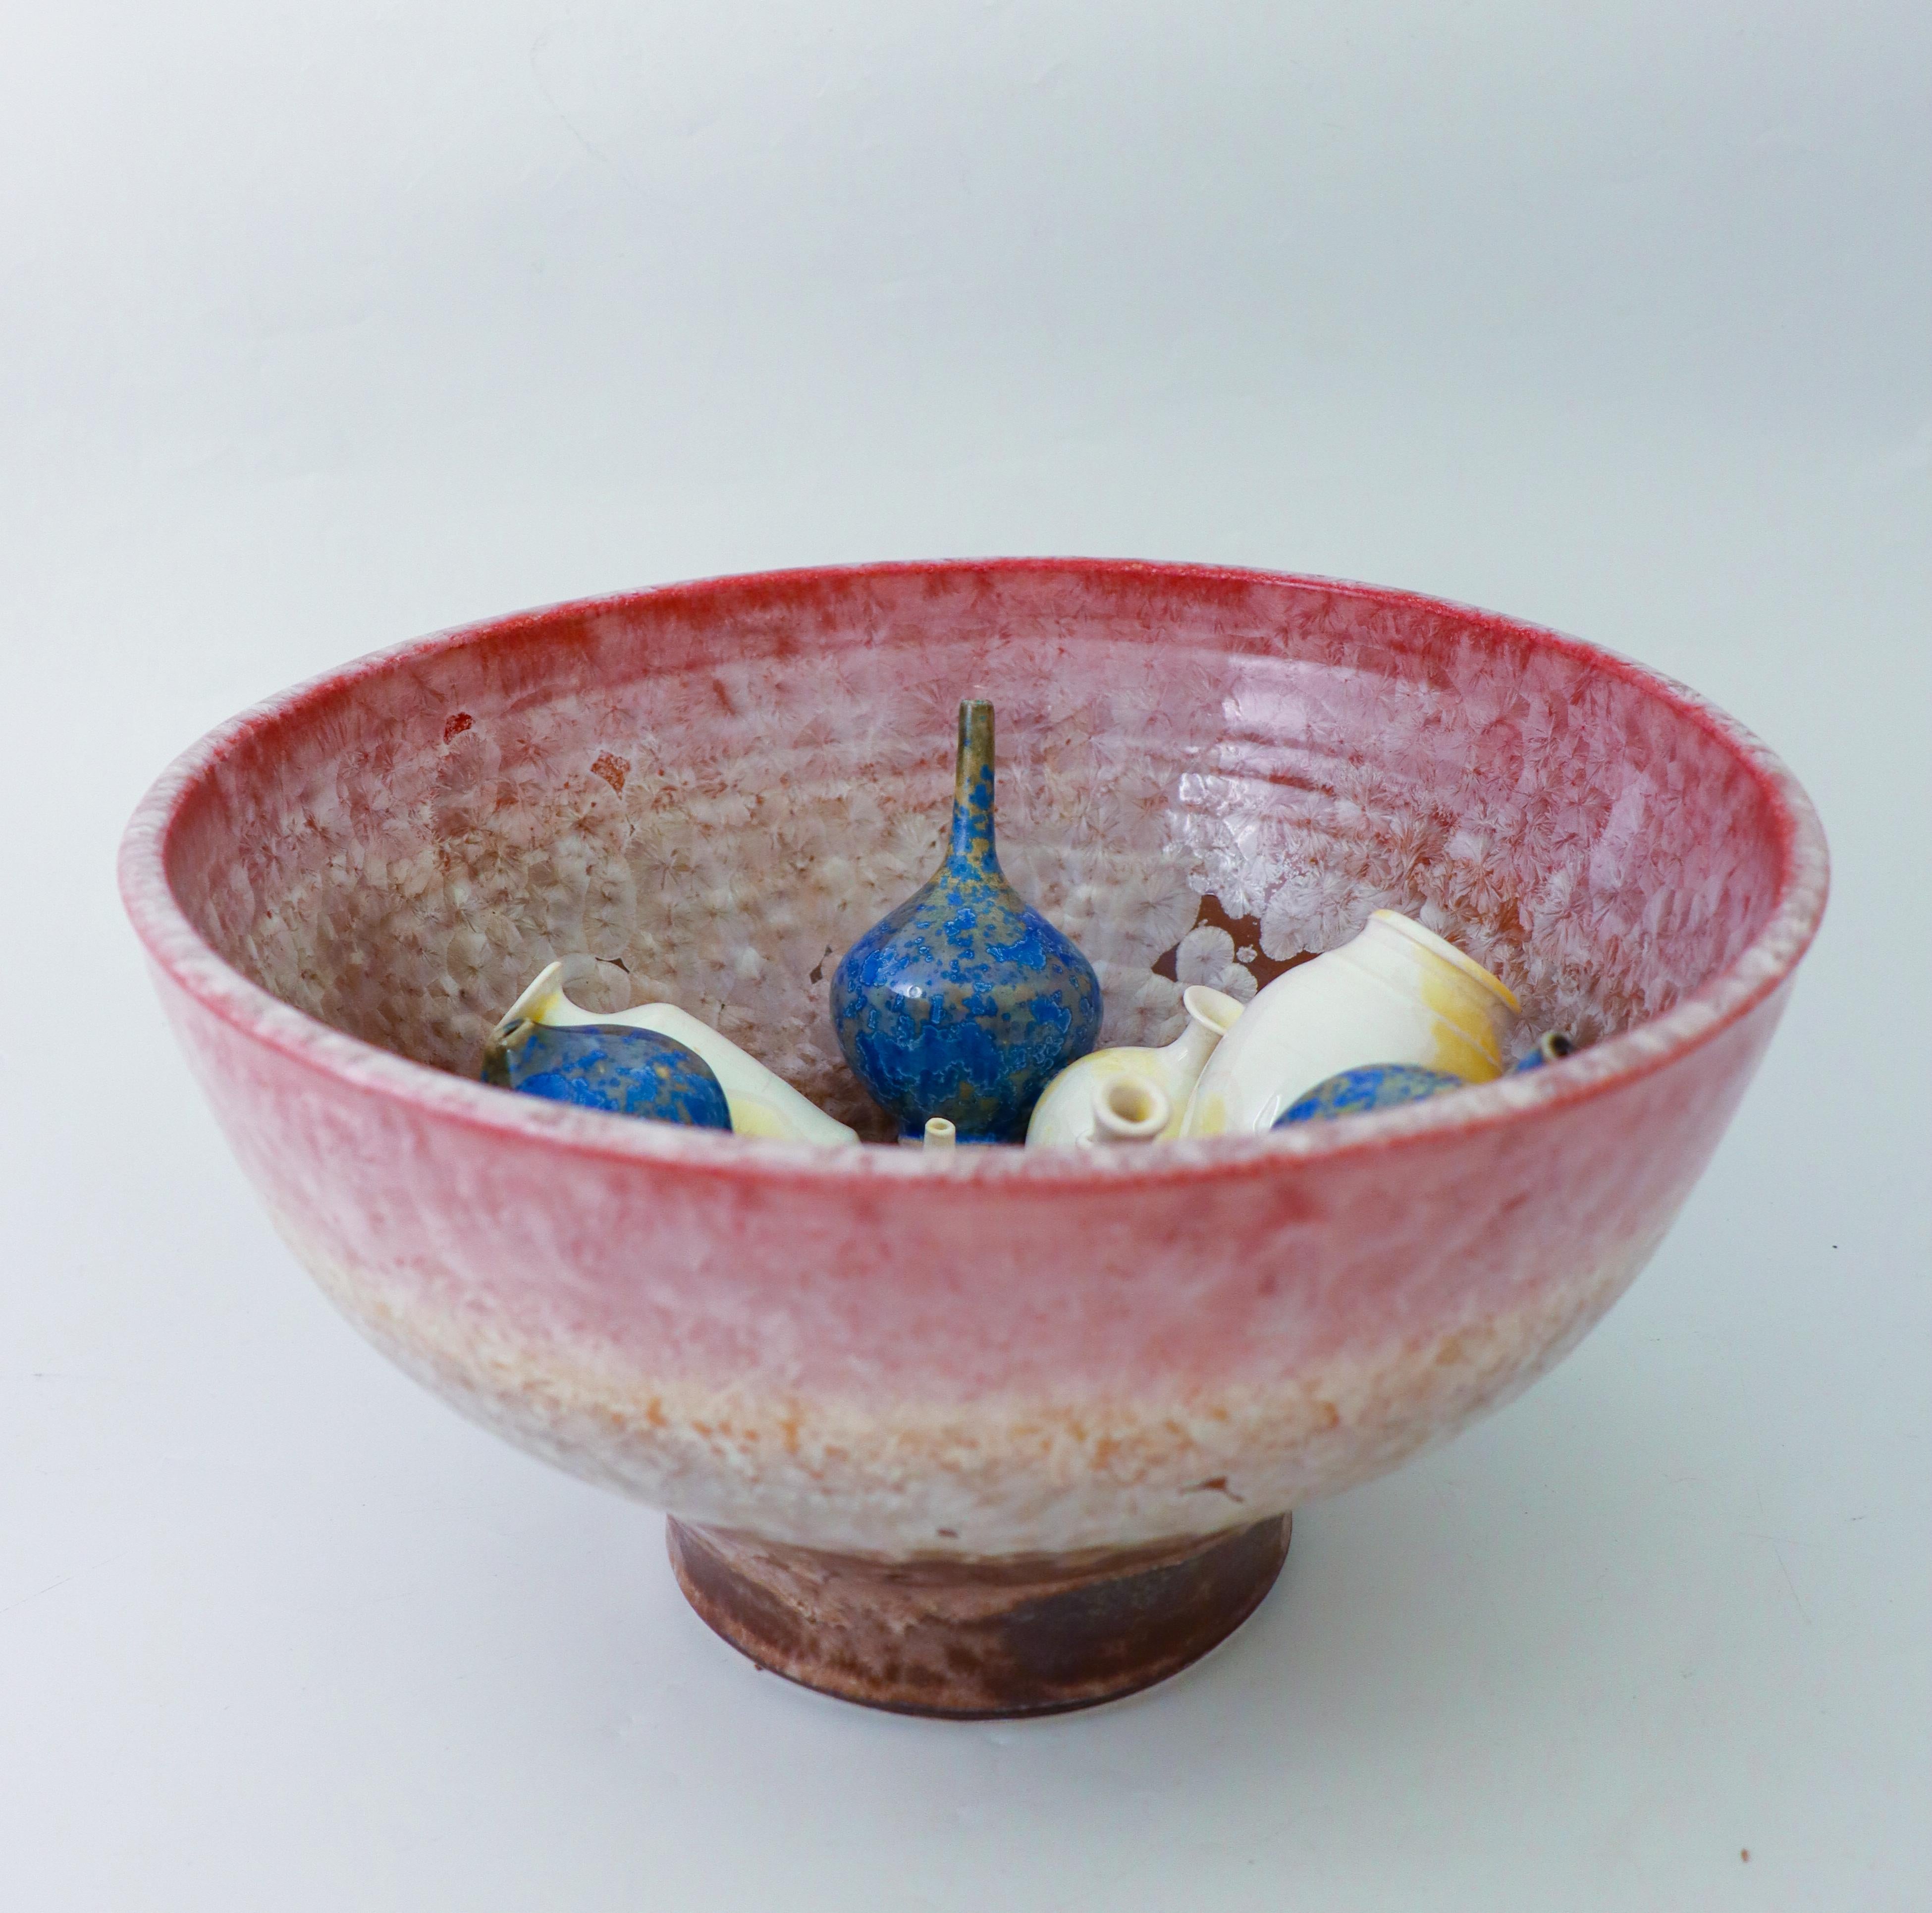 A lovely sculpture in the form of a bowl with smaller miniature vases fixed on the inside of the bowl. It comes with a lovely crystalline glaze designed by Isak Isaksson in Sweden. The bowl is 32 cm (12,8